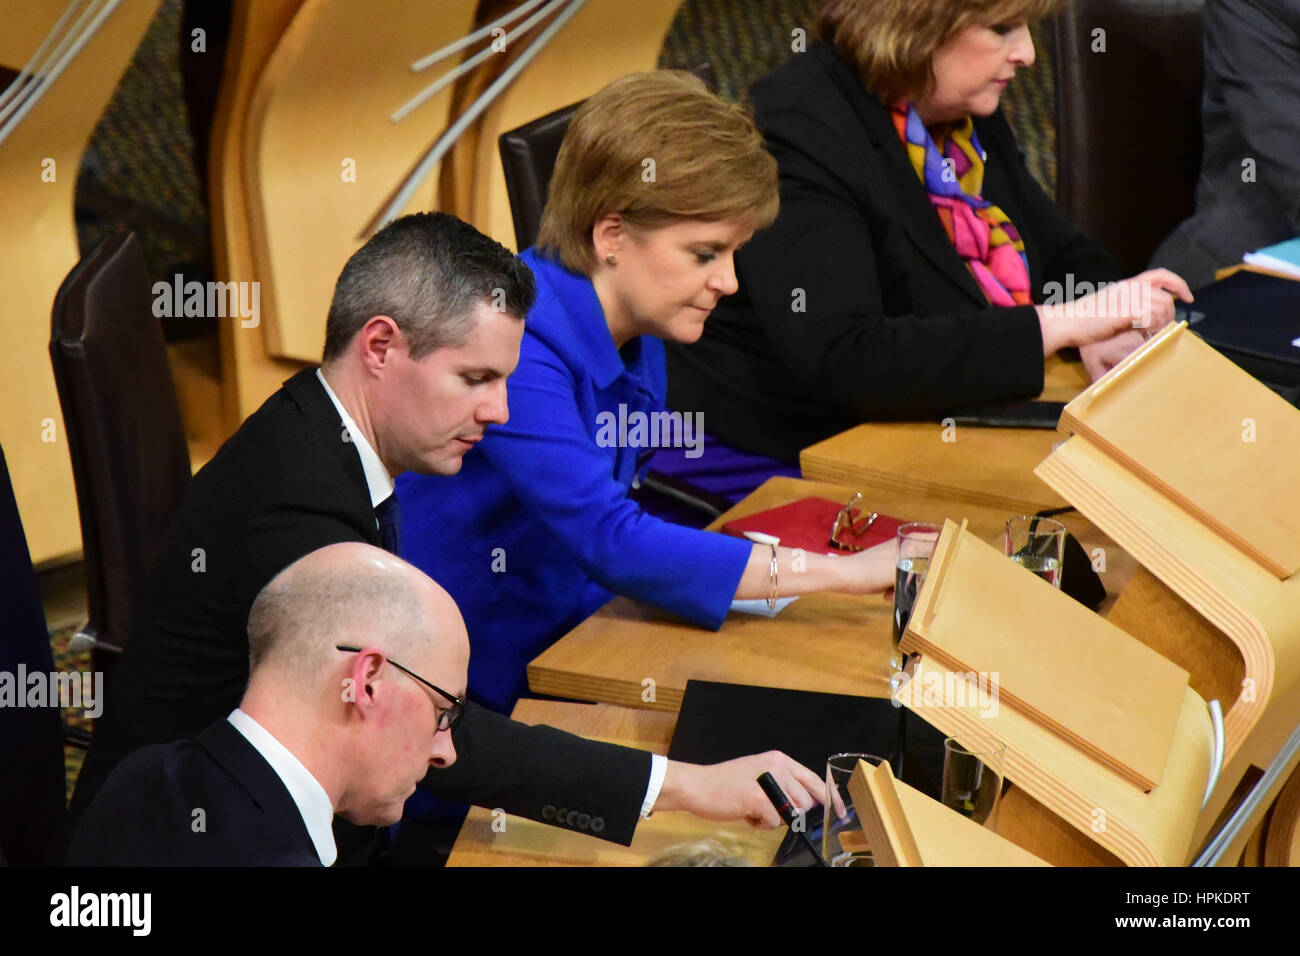 Edinburgh, Scotland, United Kingdom. 23rd February, 2017. Scottish Finance Secretary Derek Mackay (C)and First Minister Nicola Sturgeon (C) cast their electronic vote on the final stage of the Scottish budget, which the Government finally carried, Credit: Ken Jack/Alamy Live News Stock Photo